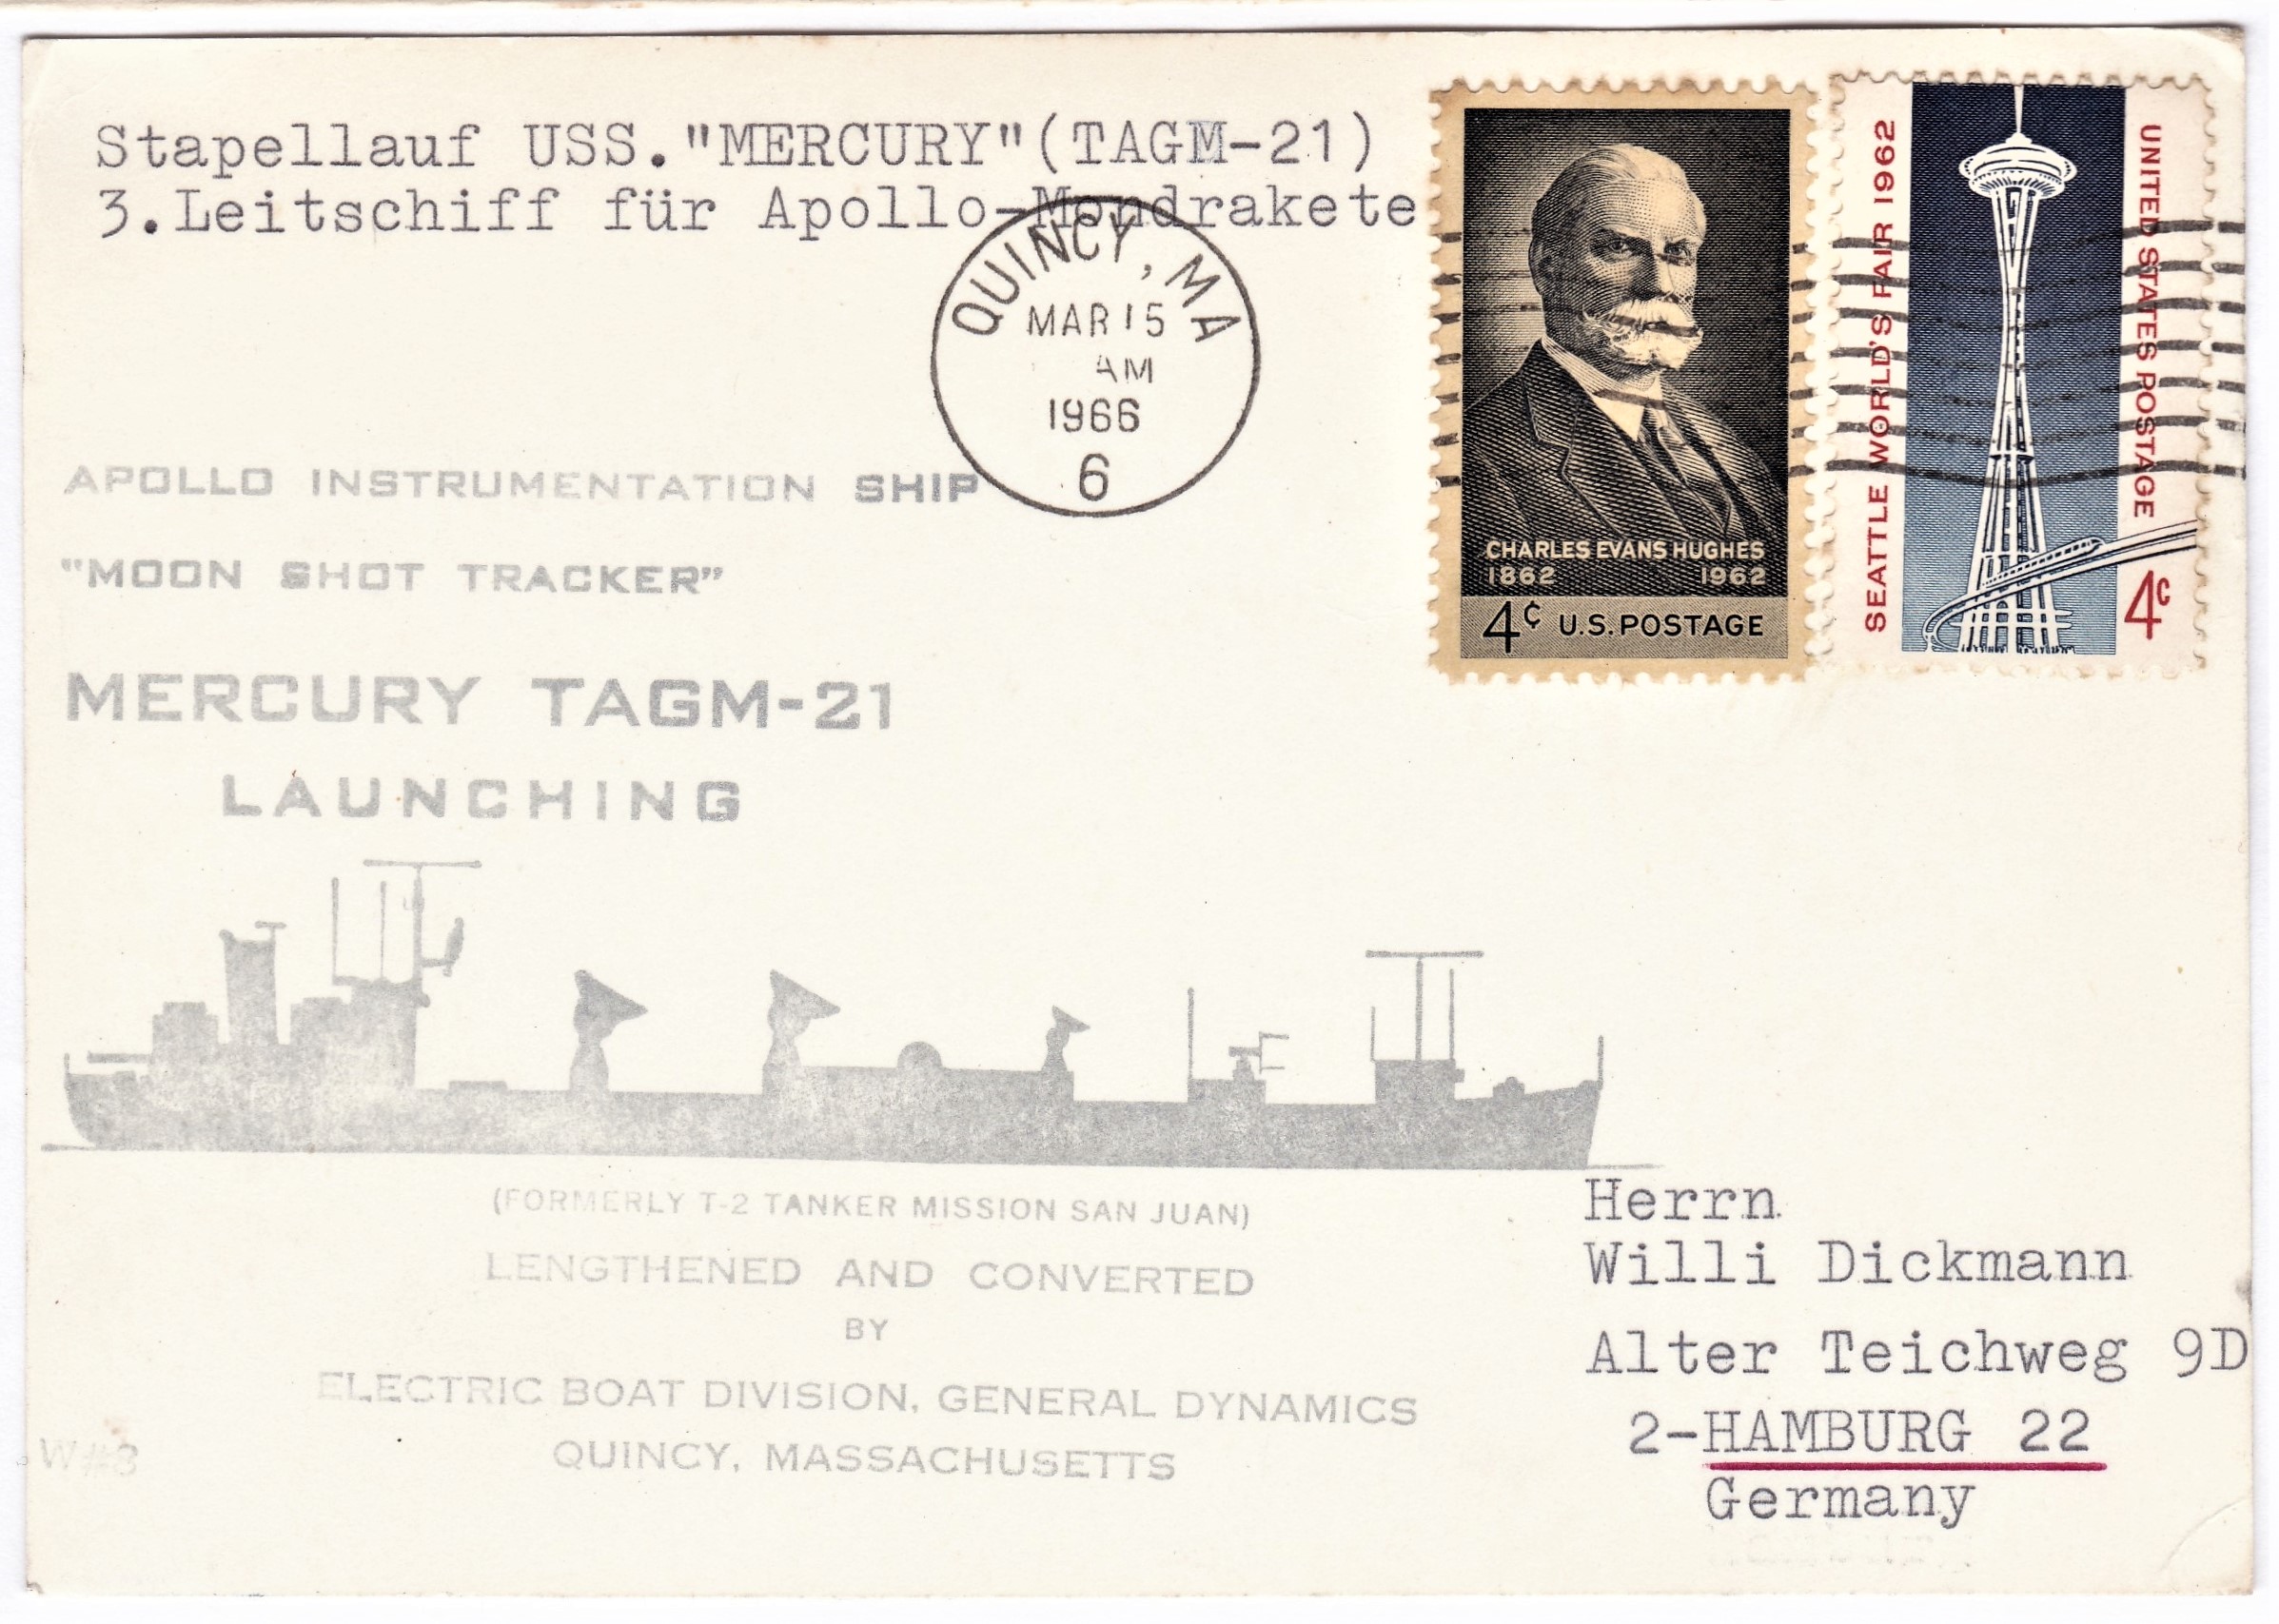 Space + Rocket Mail-card issued by General Dynamics electric boat division for the Apollo rocket